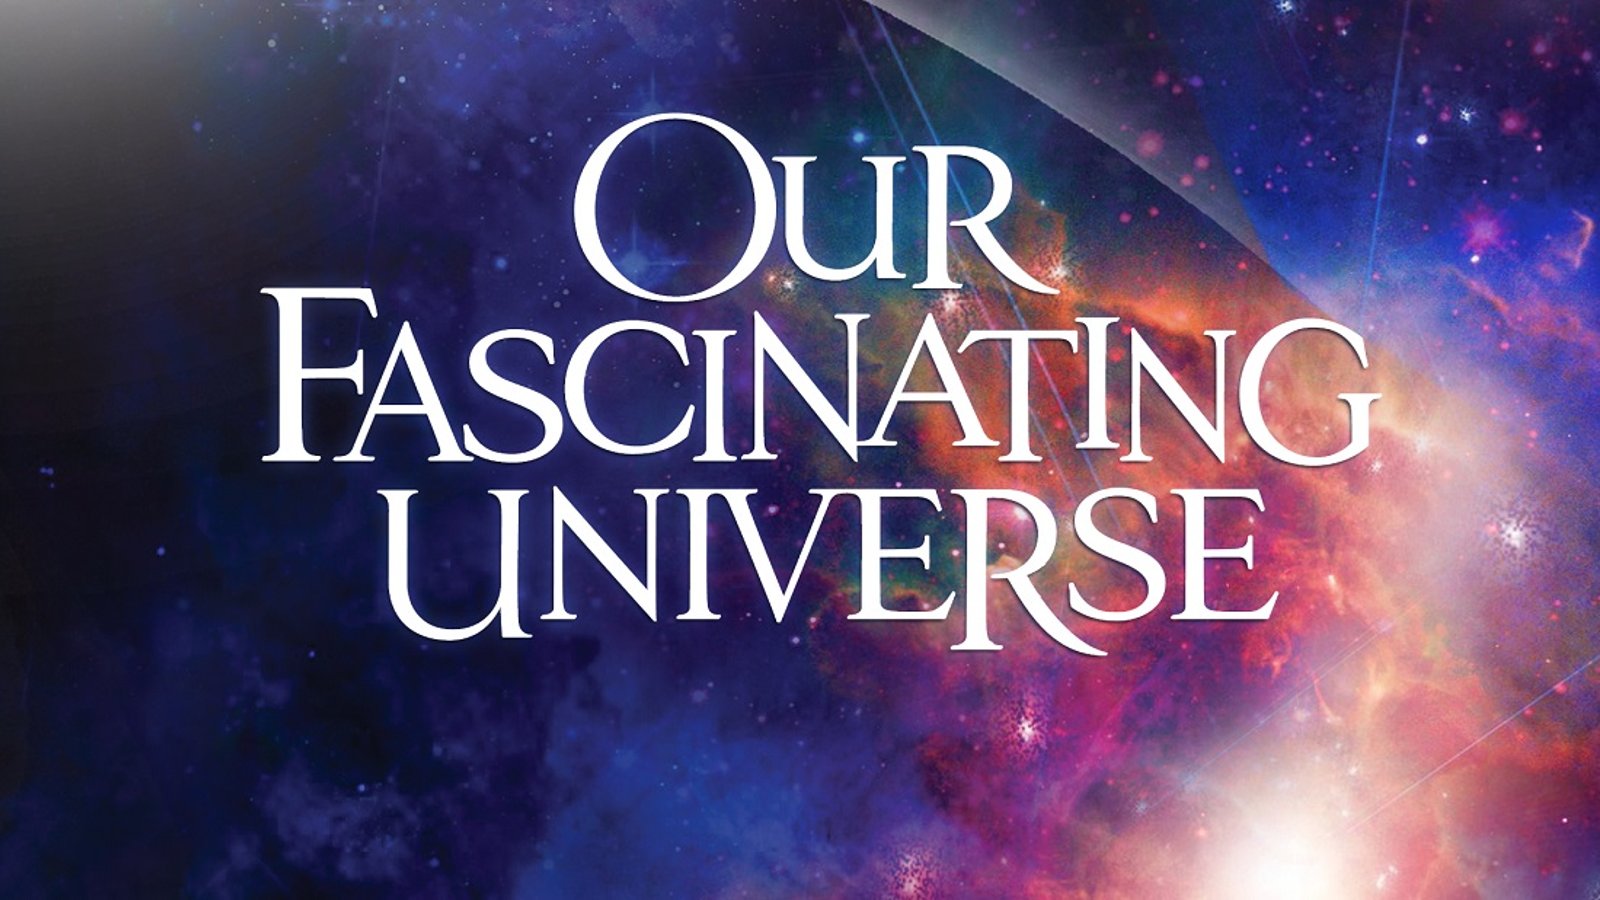 Our Fascinating Universe